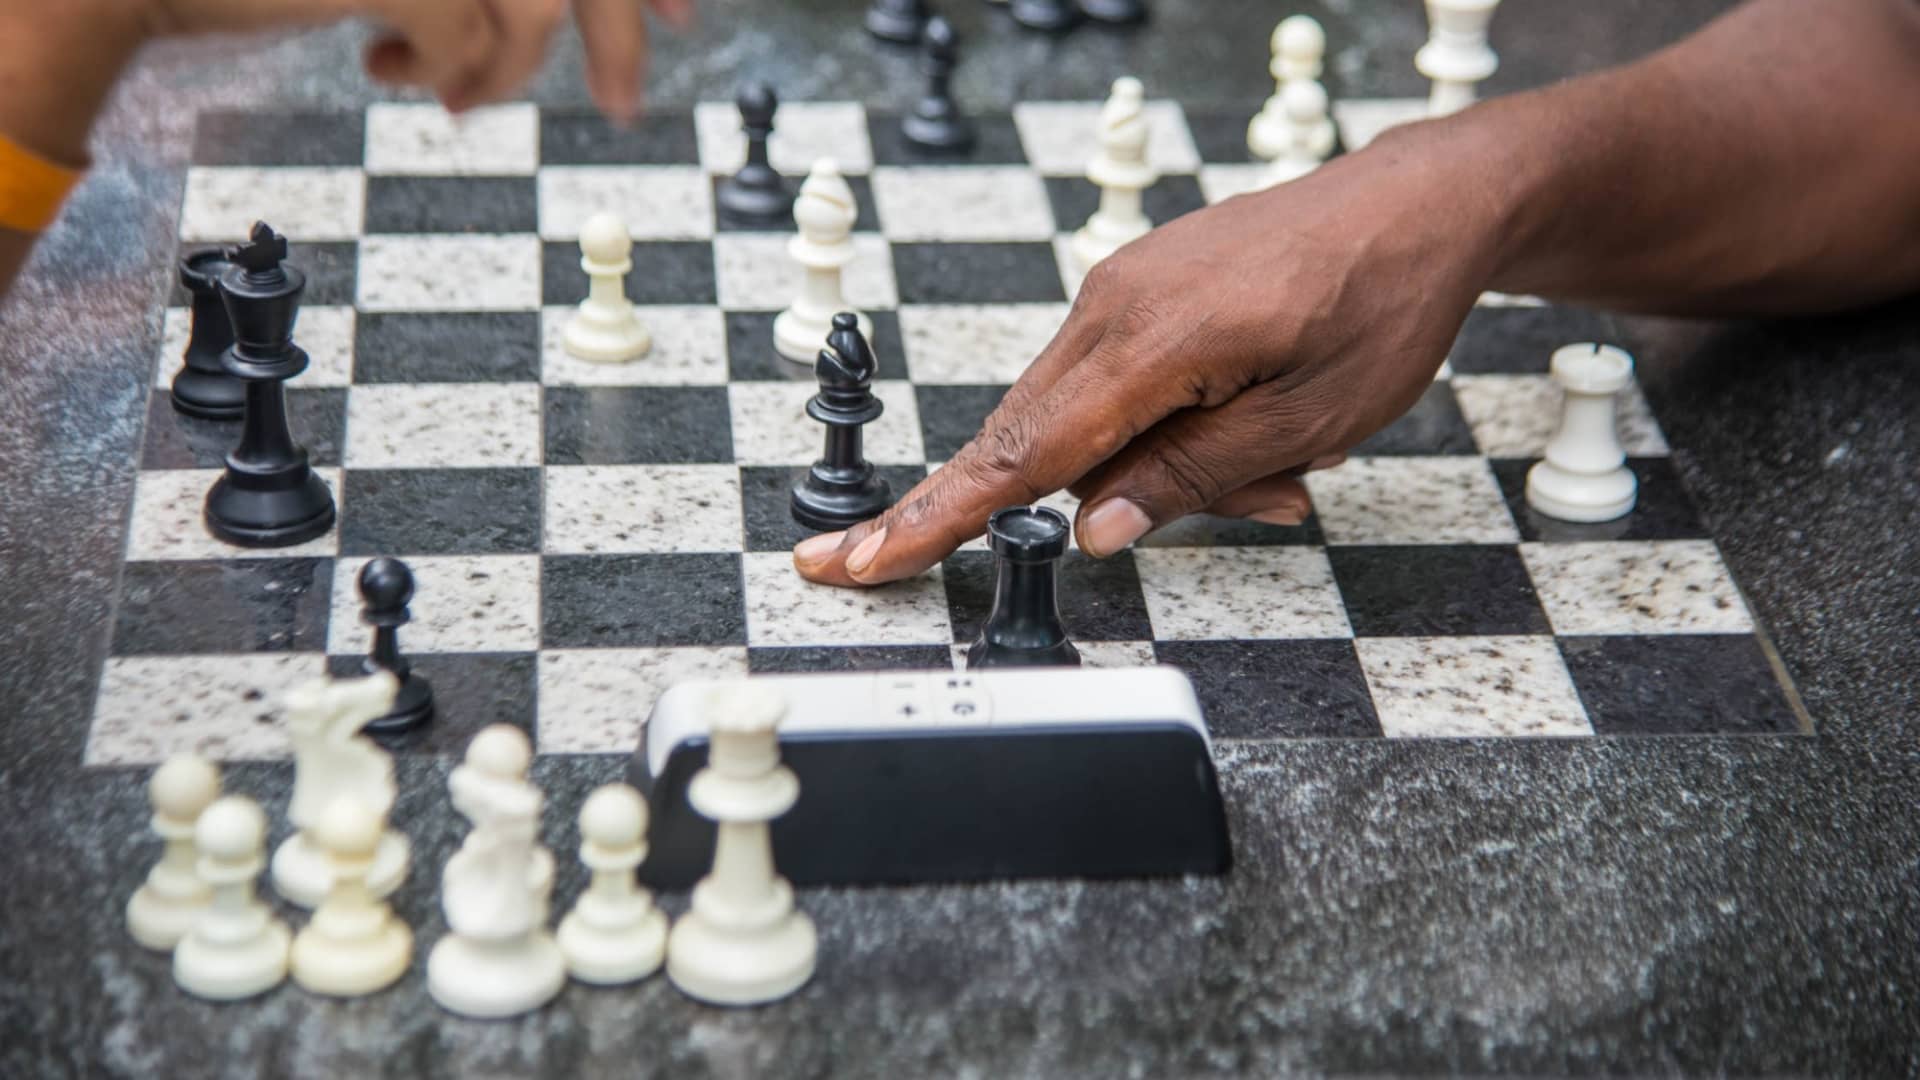 Here, Is what you should know about the 10 Strongest Chess Players